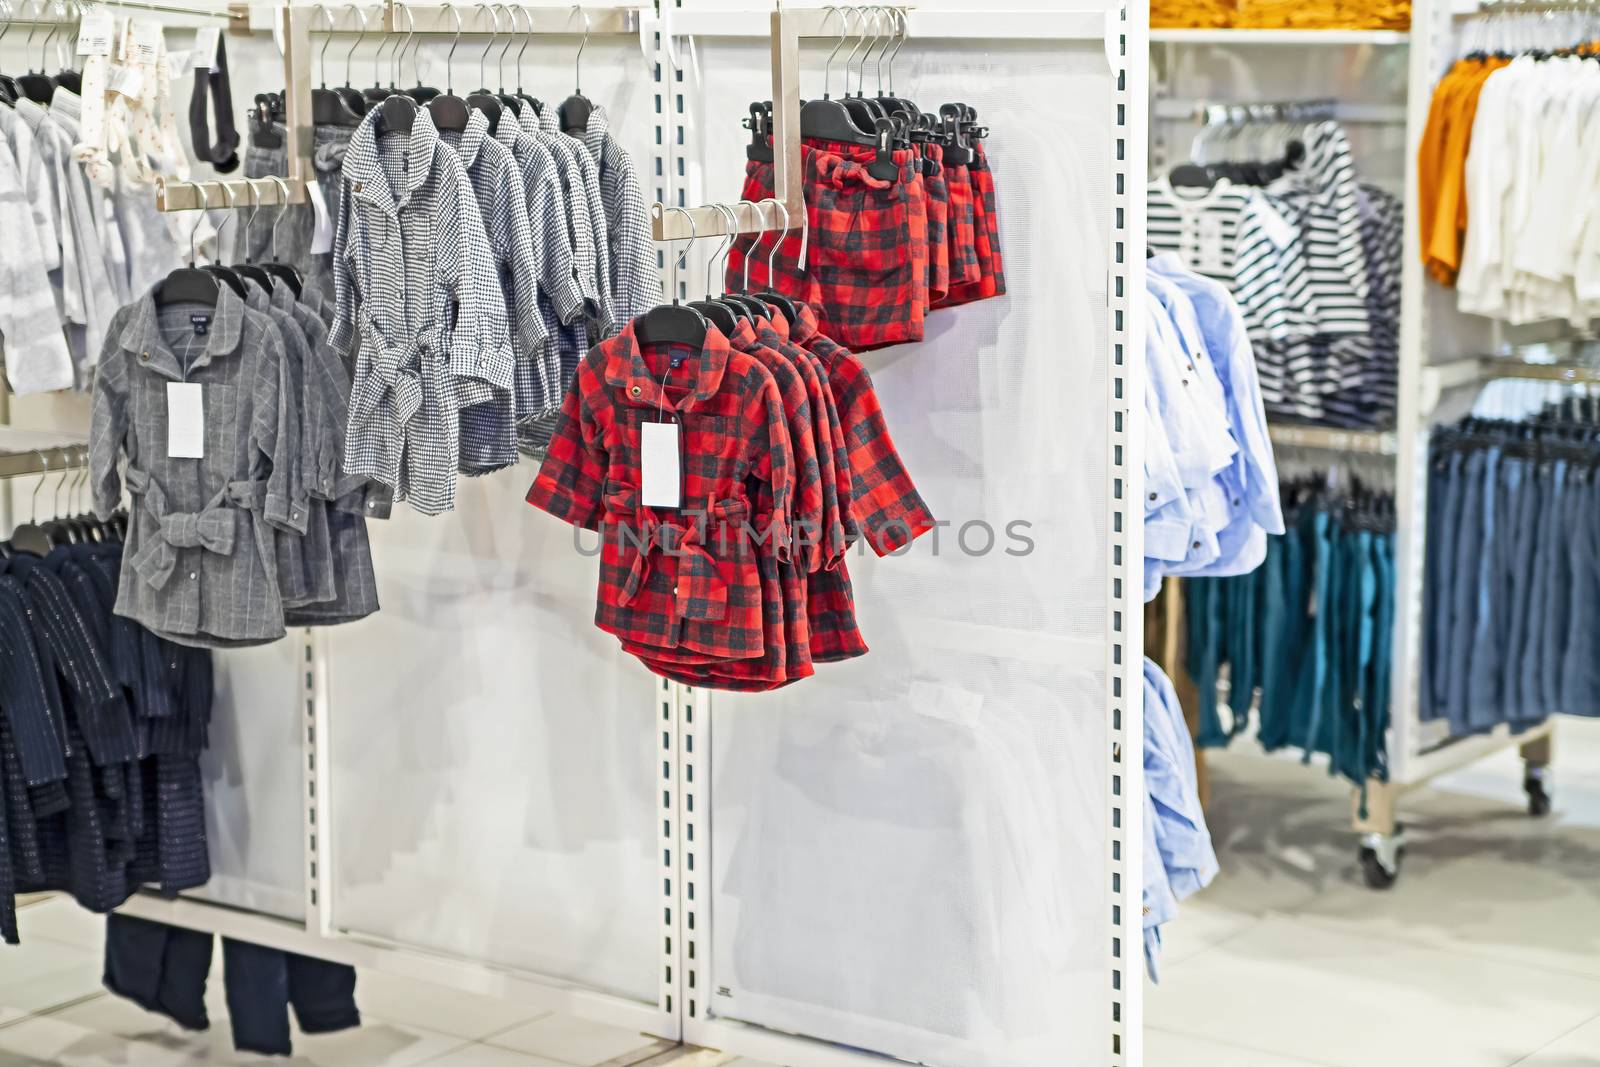 Clothes of different colors and styles hang on hangers in the children's clothing store.